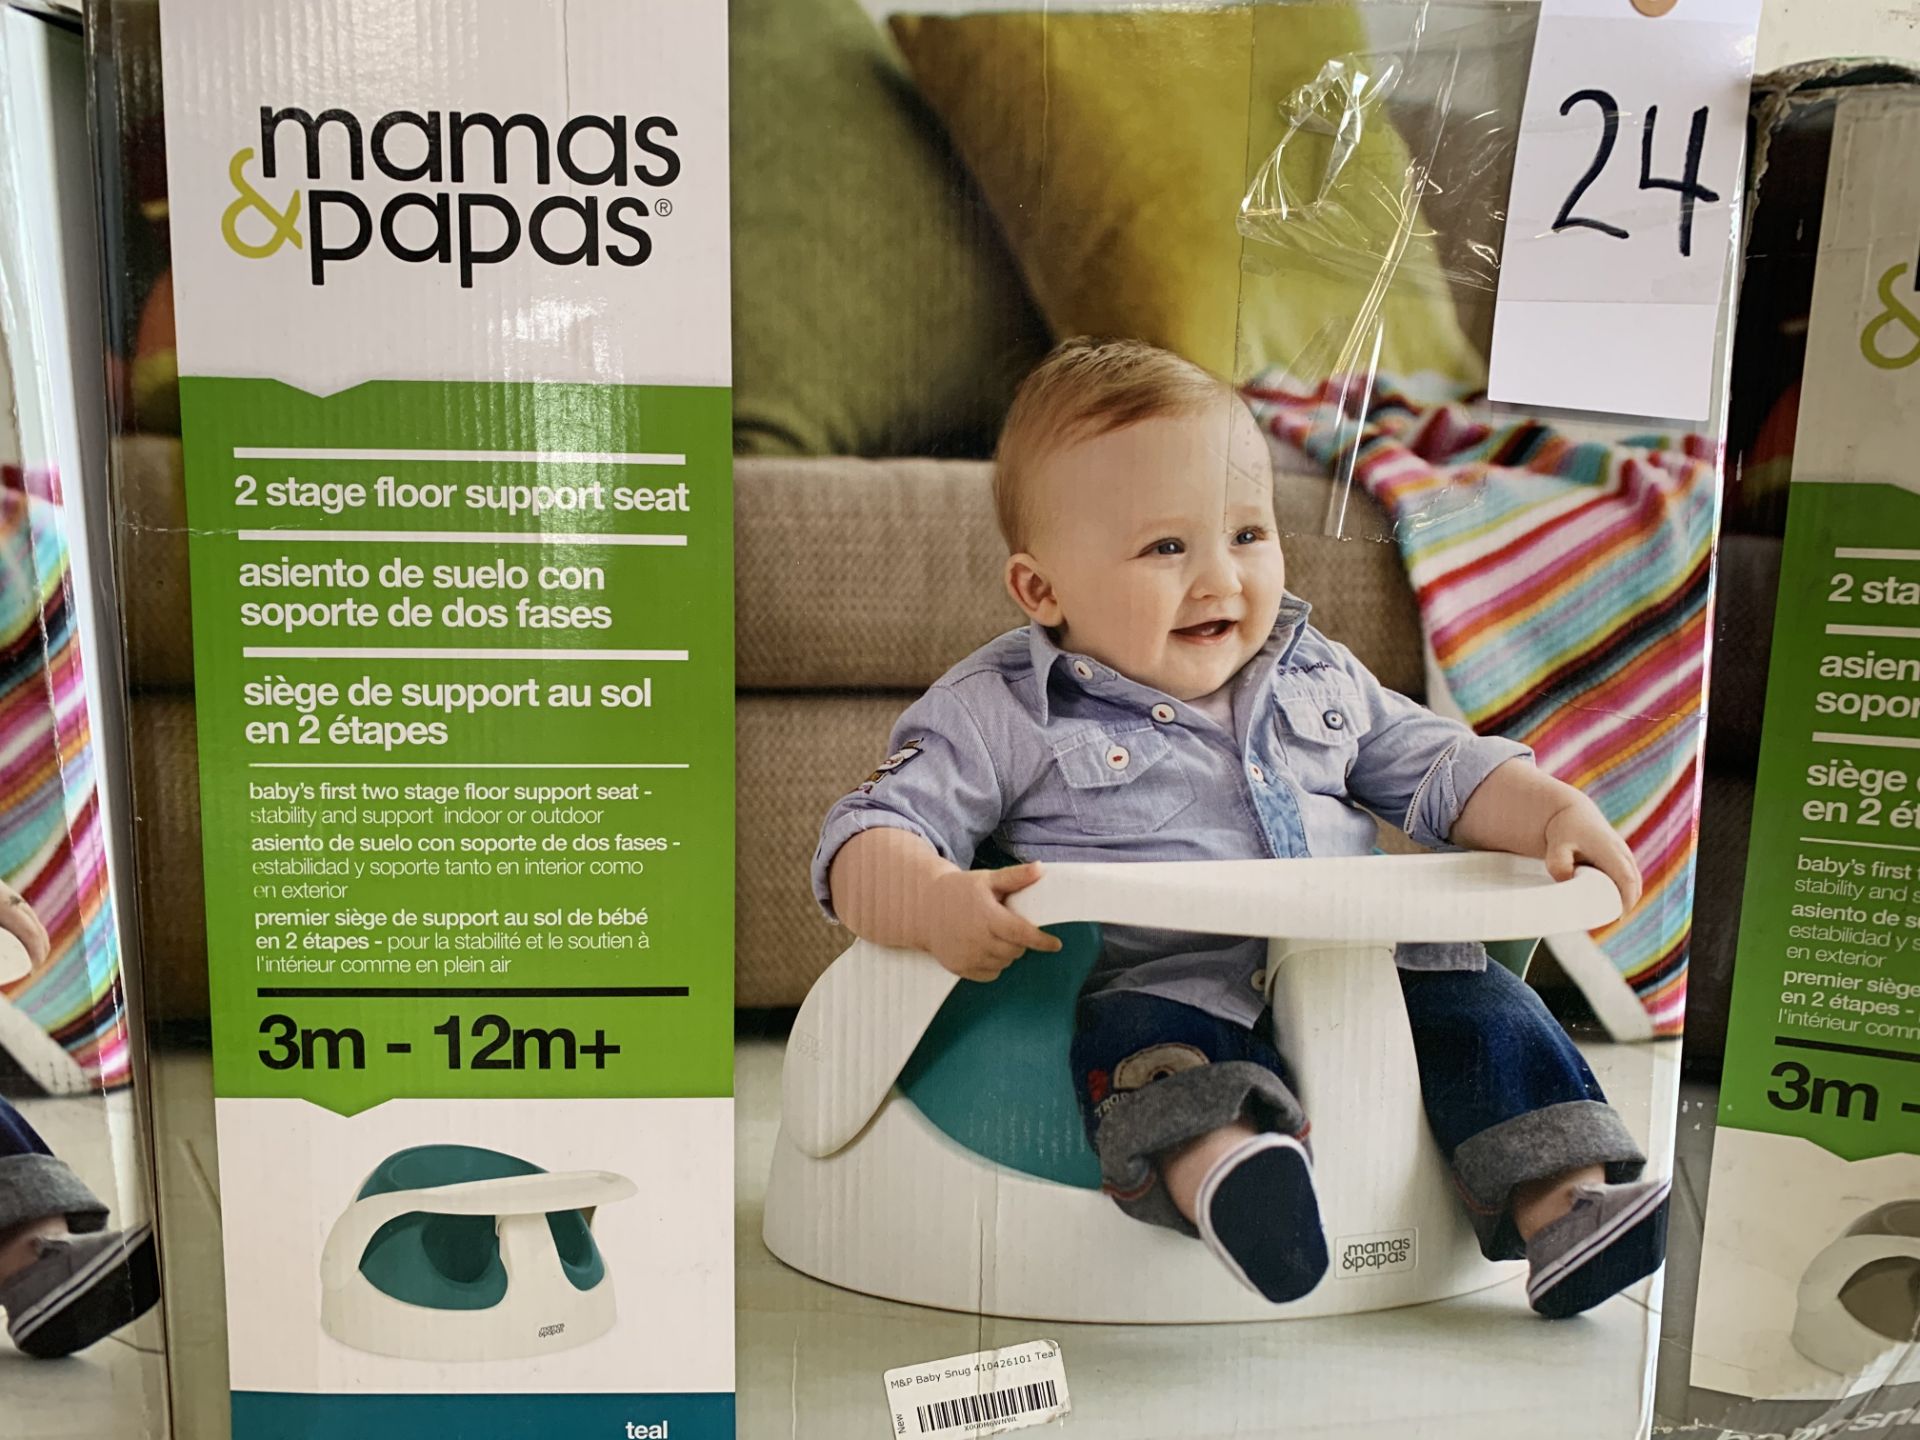 Mamas & Papas 2 Stage Floor Support Seat, 3 Items - Image 4 of 4